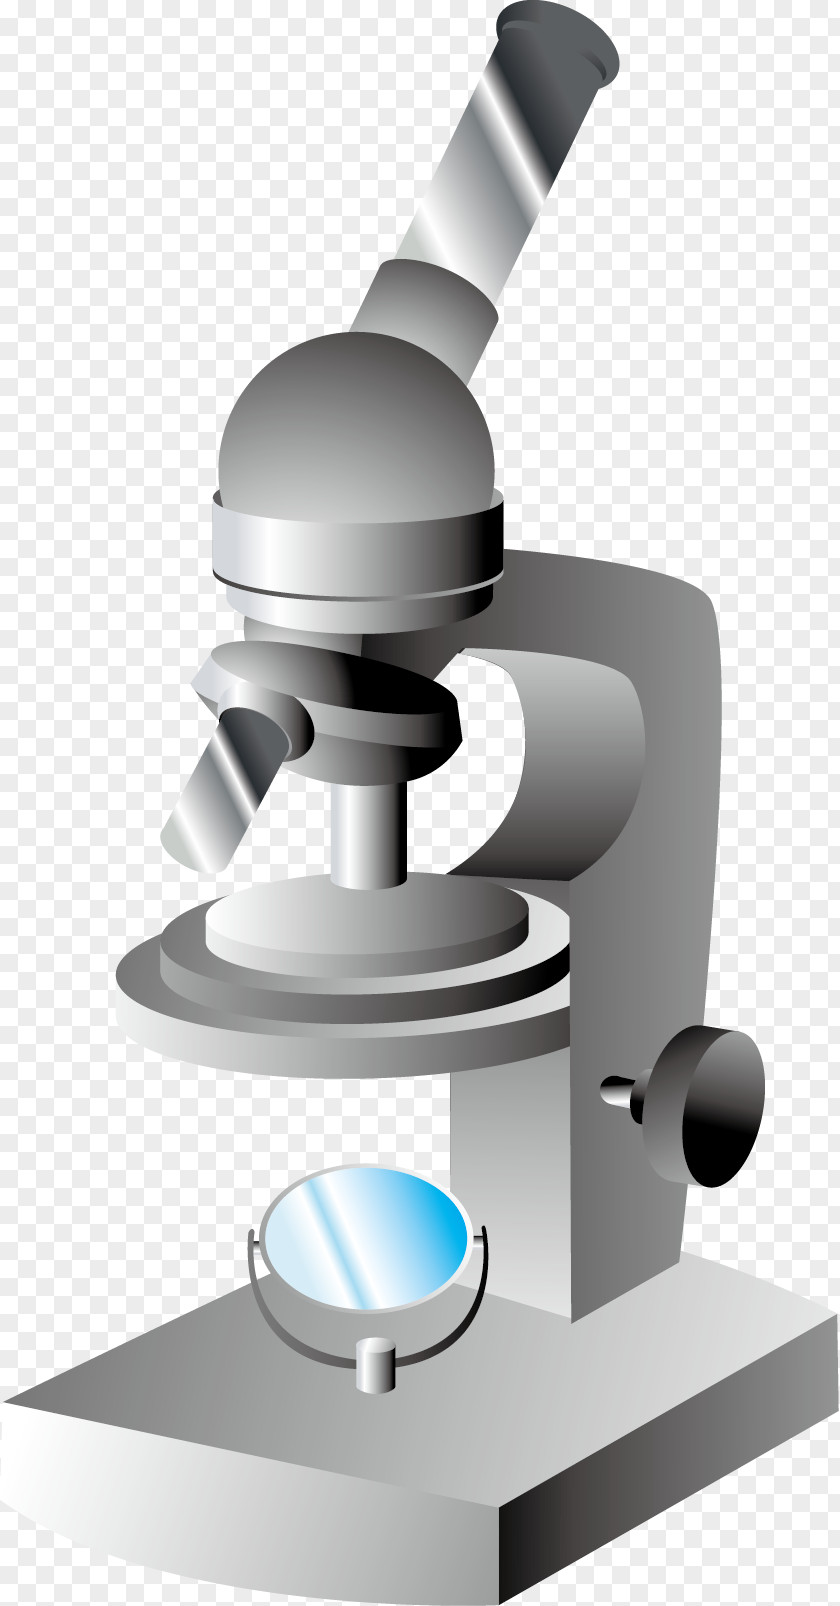 Hand-painted Microscope Image Processing PNG